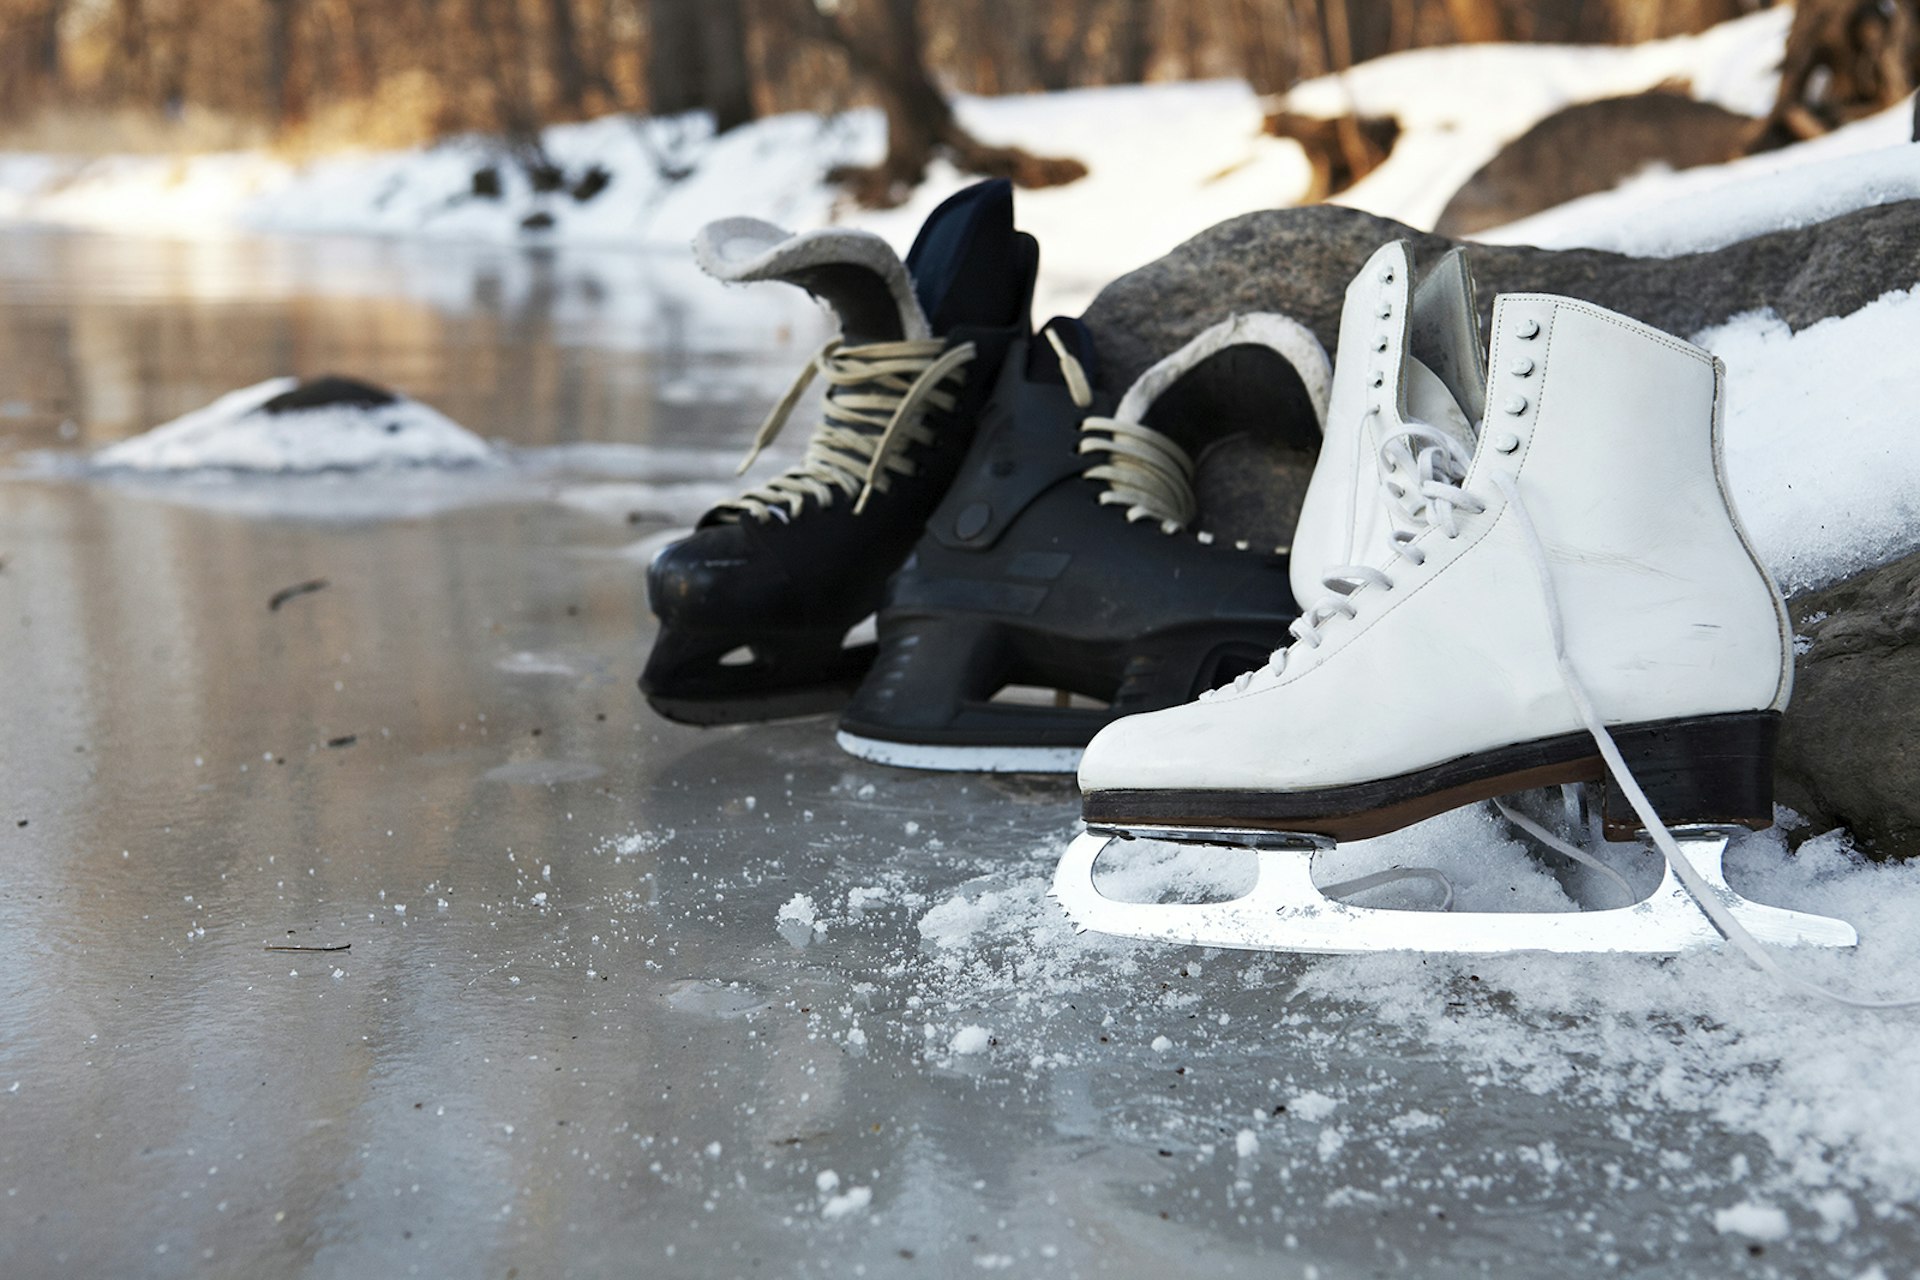 Hockey skates and figure skates together on a frozen pond in winter in Minneapolis 